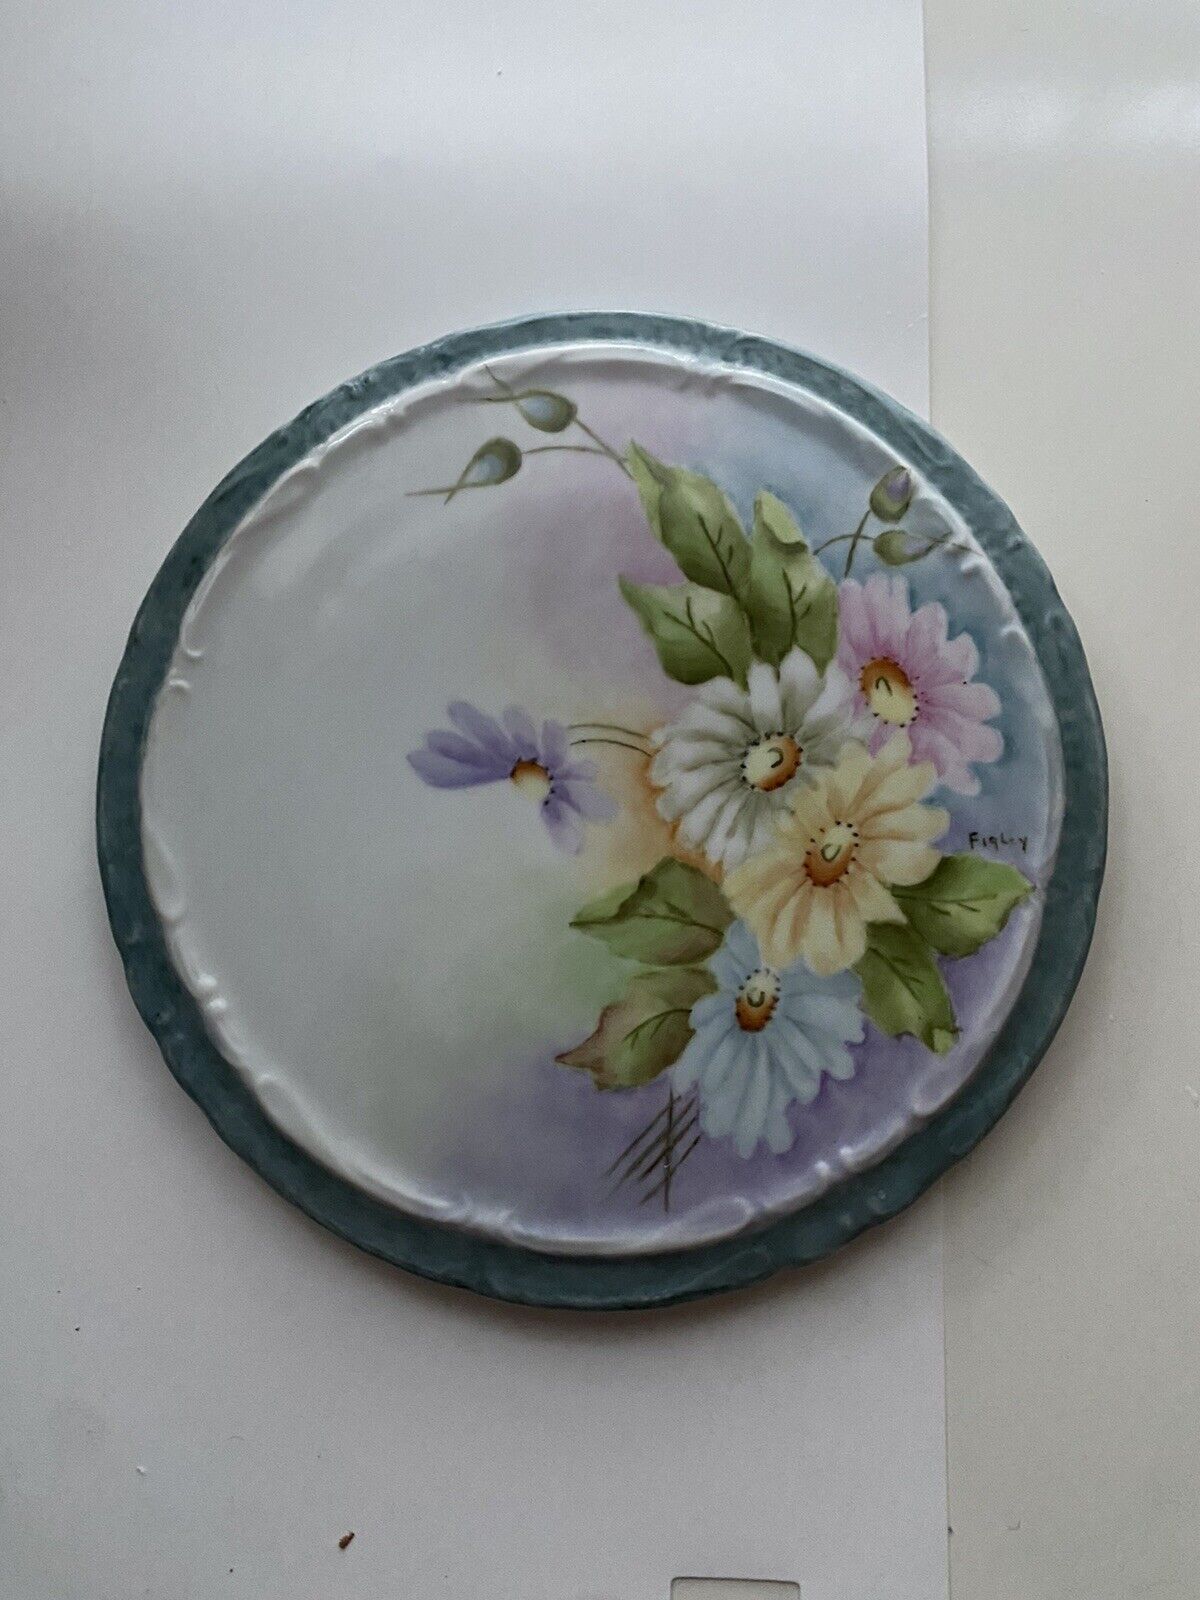 VERY OLD Antique Plate Hand Painted & Signed / Very Pretty Floral Design